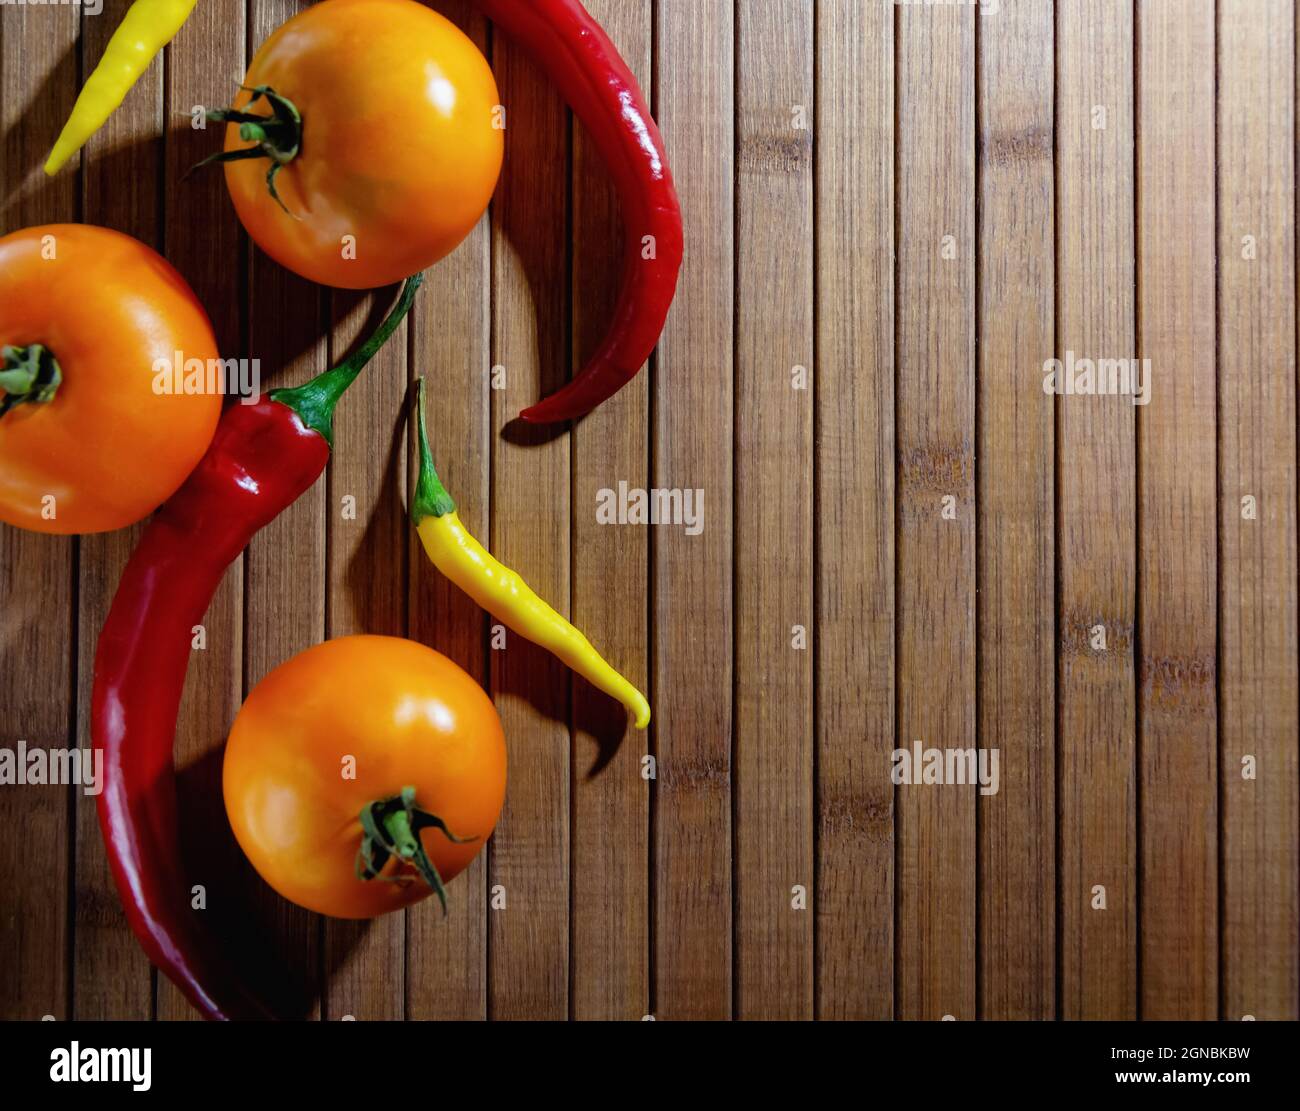 Yellow tomatoes and hot red peppers lie on a wooden background, horizontal image. High quality photo Stock Photo